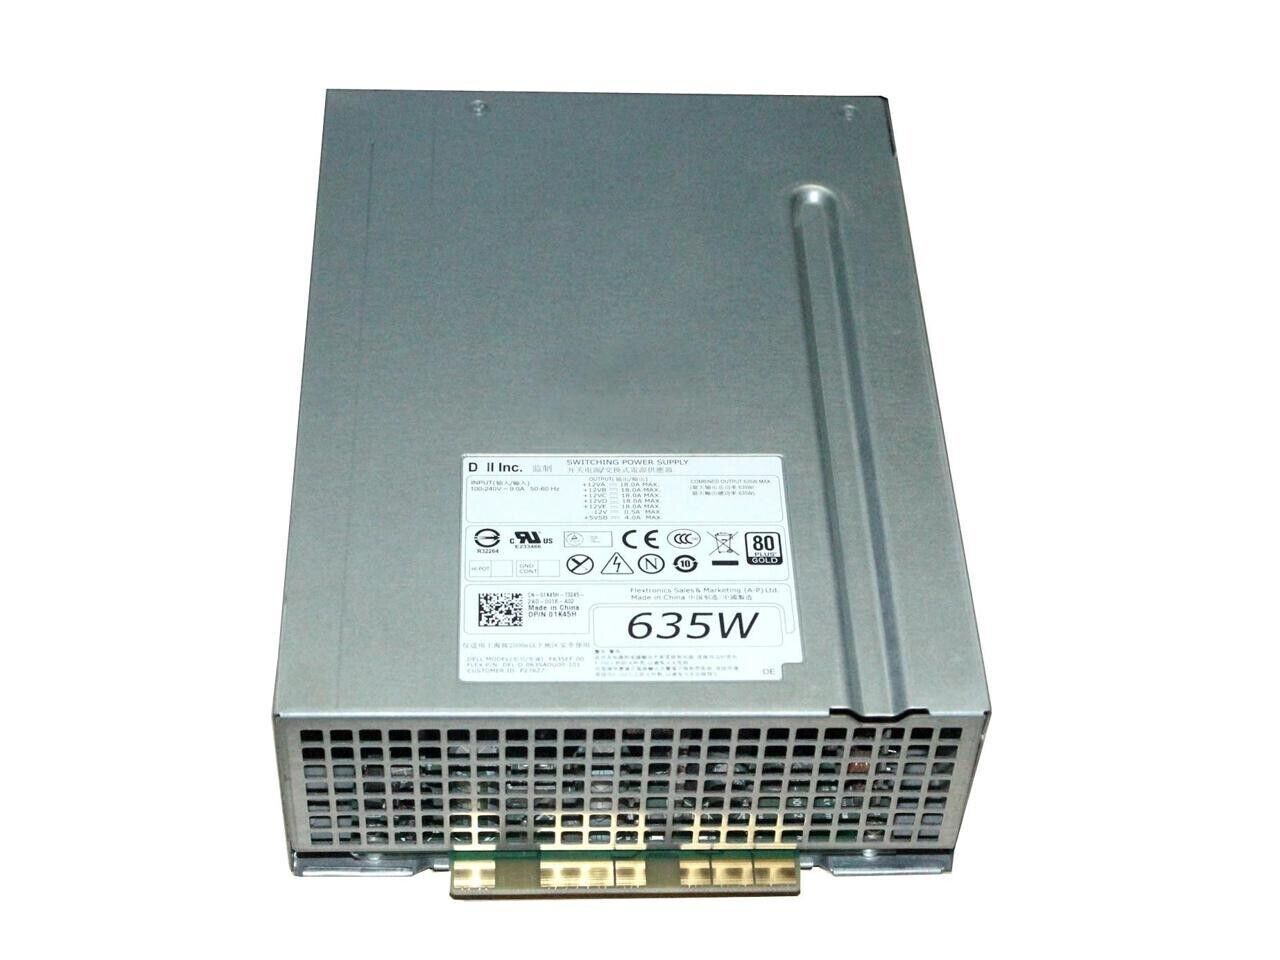 FOR DELL T3600 T5600 635W AIO Power Supply 0NVC7F DEL-D-0365ADU00-101 D635EF-00